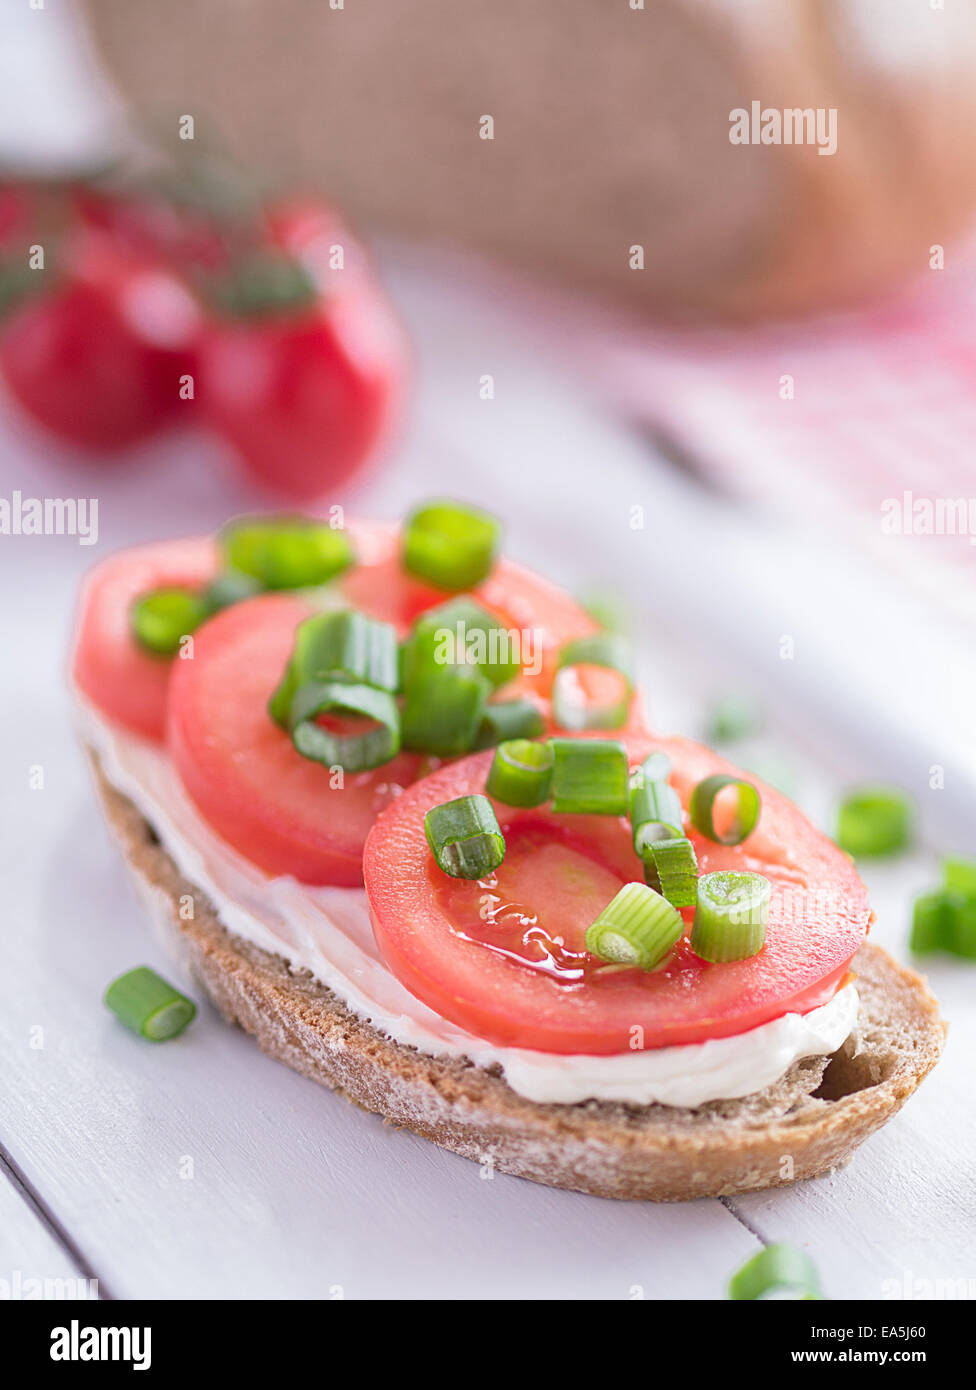 A slice of bread filled with tomato slices. Stock Photo